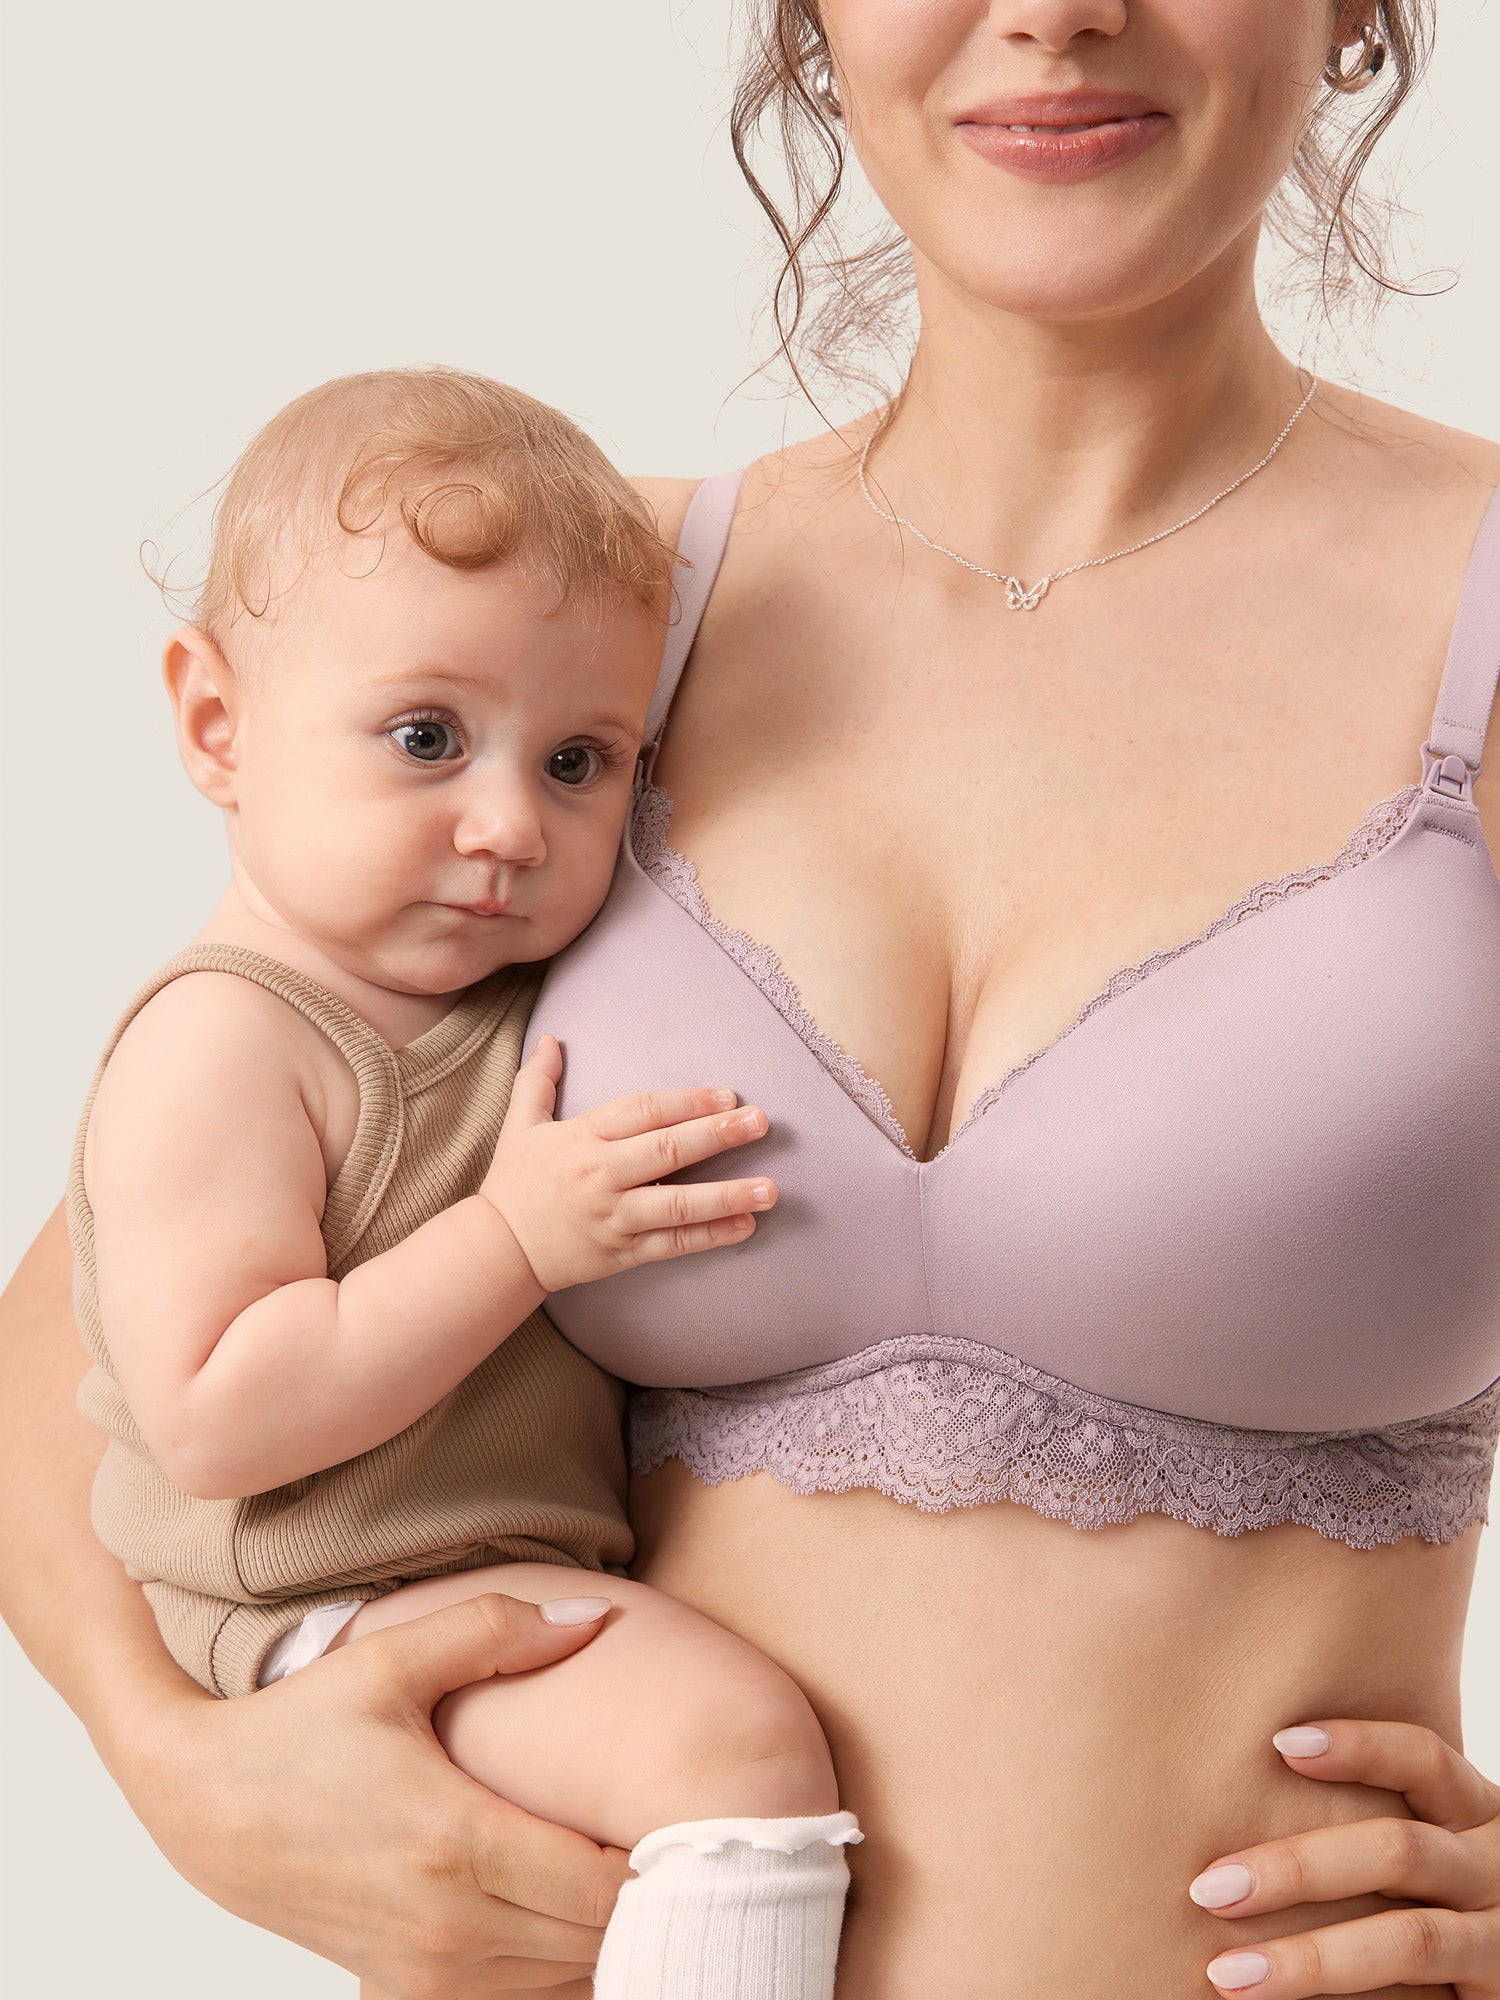 5 Things to Look for in a Nursing Bra Featuring Momanda